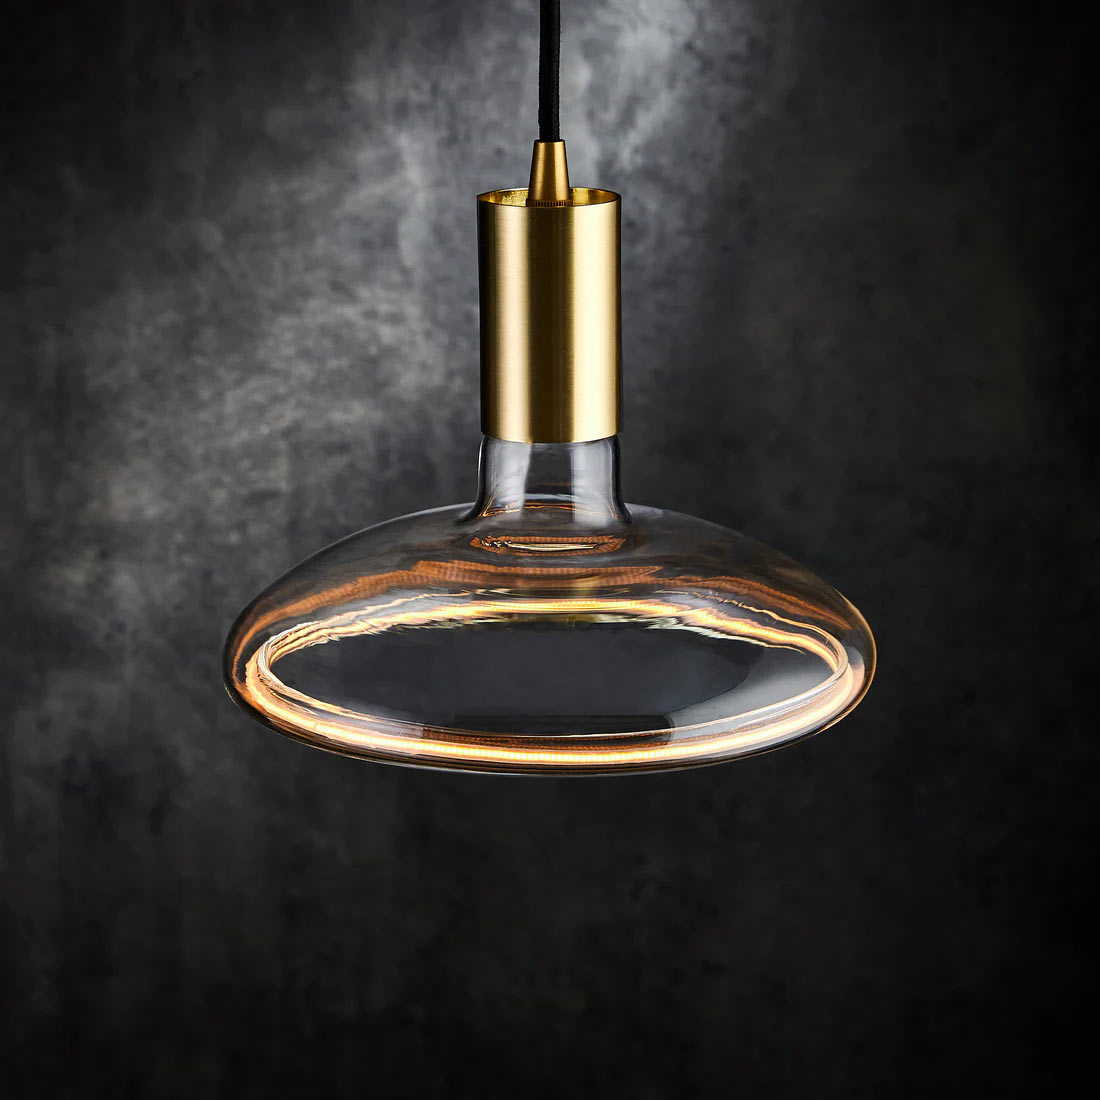 Azure Orbit M200 Pendant Bulb is a light bulb pendant from Well Lit and sold by South Charlotte Fine Lighting